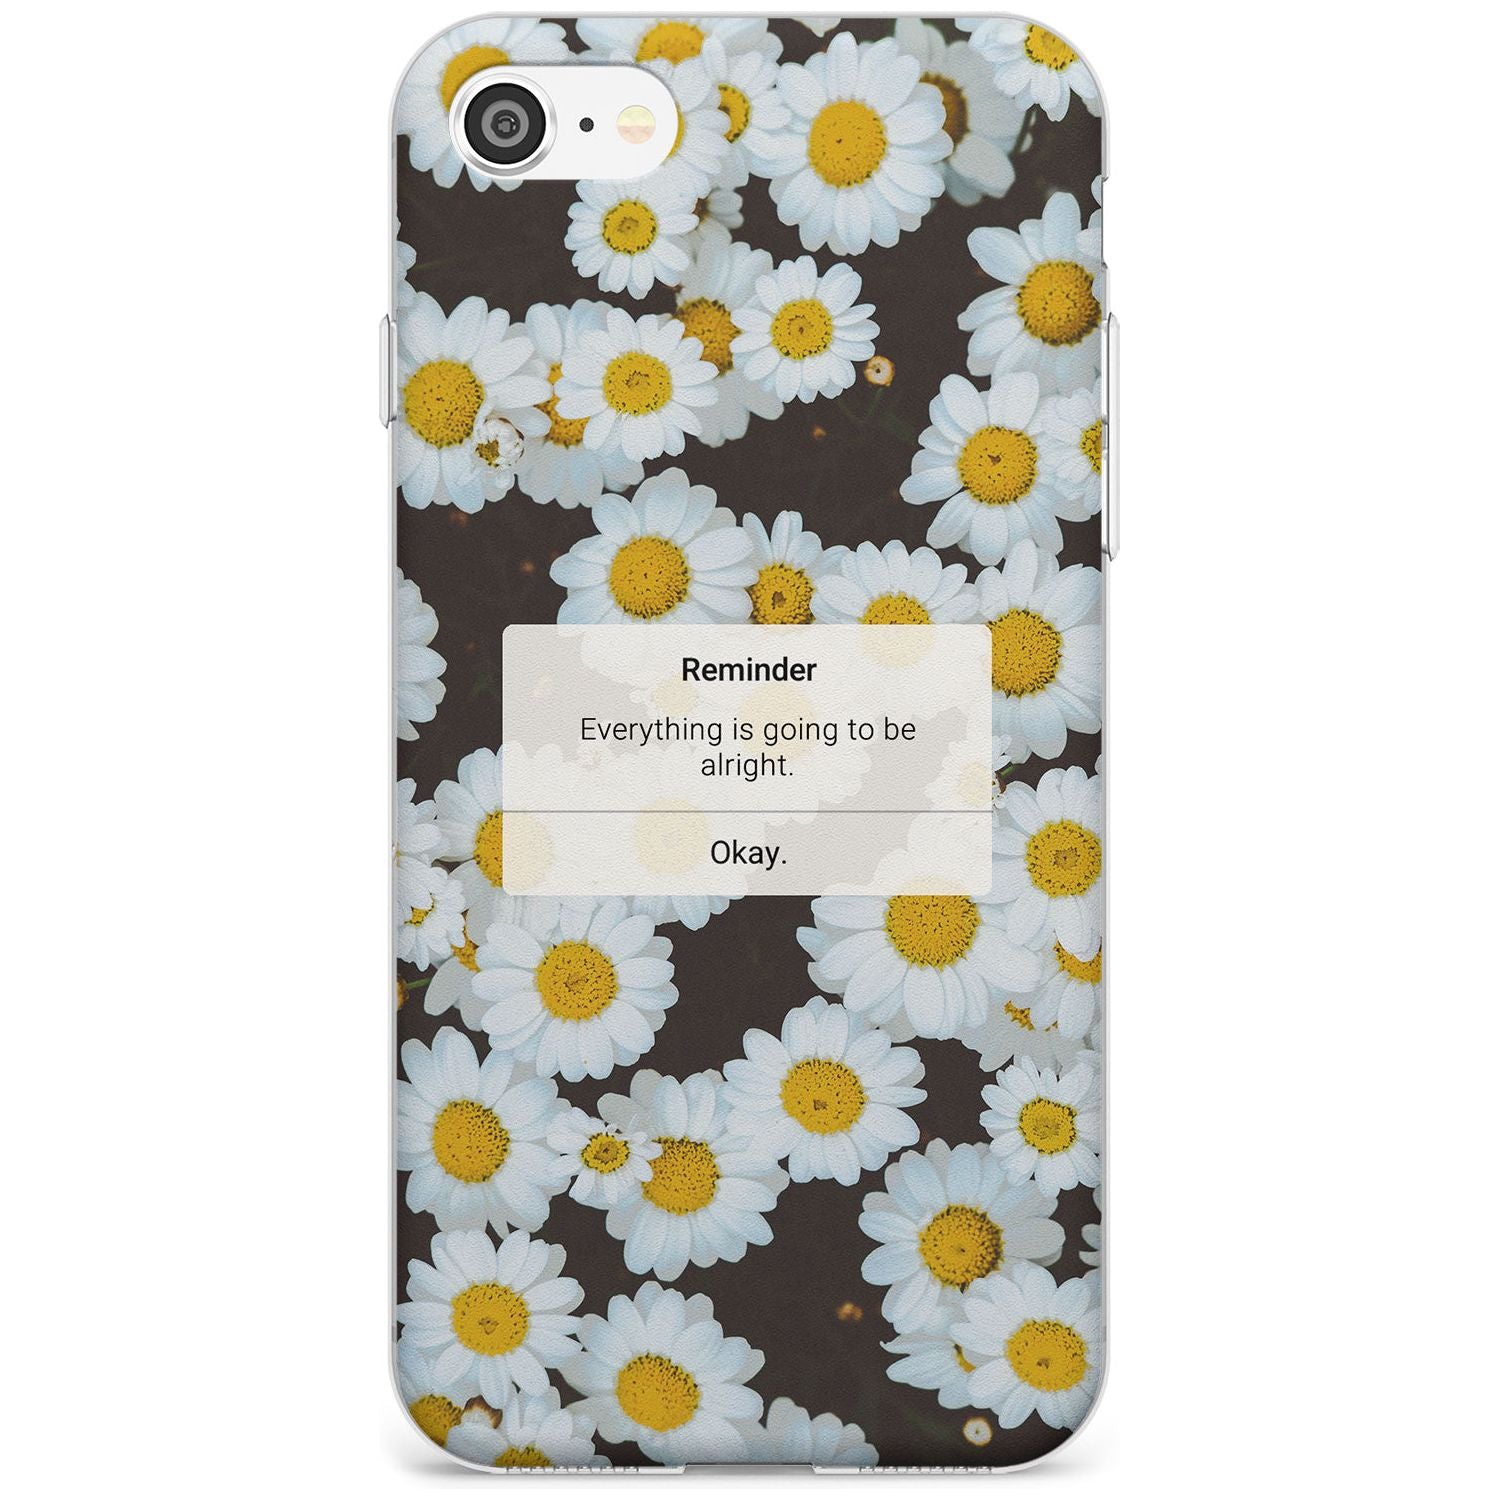 "Everything will be alright" iPhone Reminder Black Impact Phone Case for iPhone SE 8 7 Plus